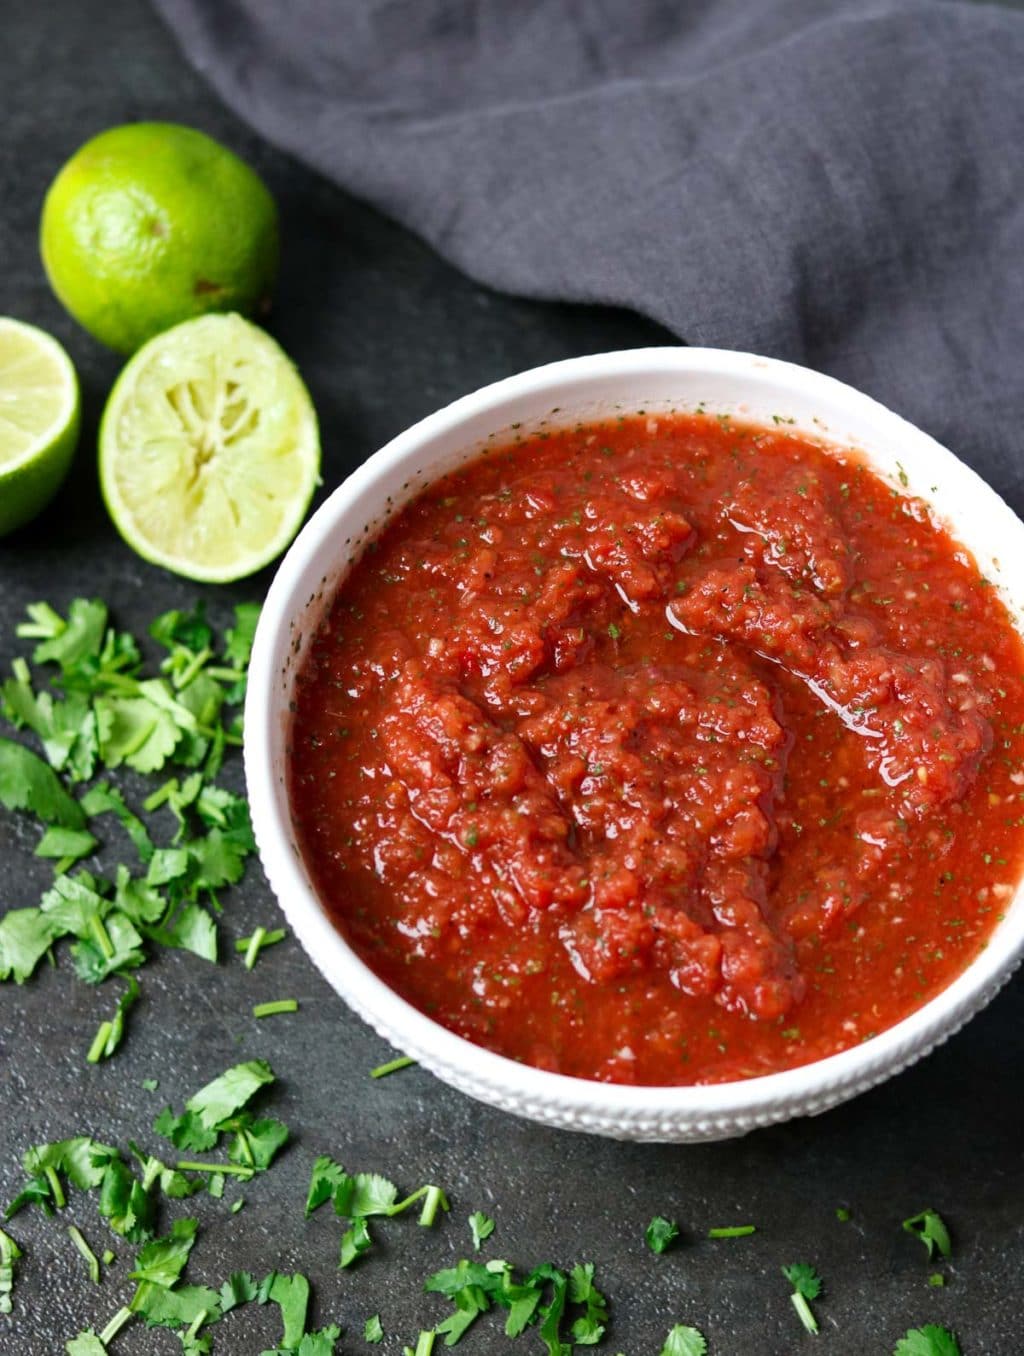 Restaurant Style Salsa in a white bowl with cilantro scattered on the counter and limes in the background